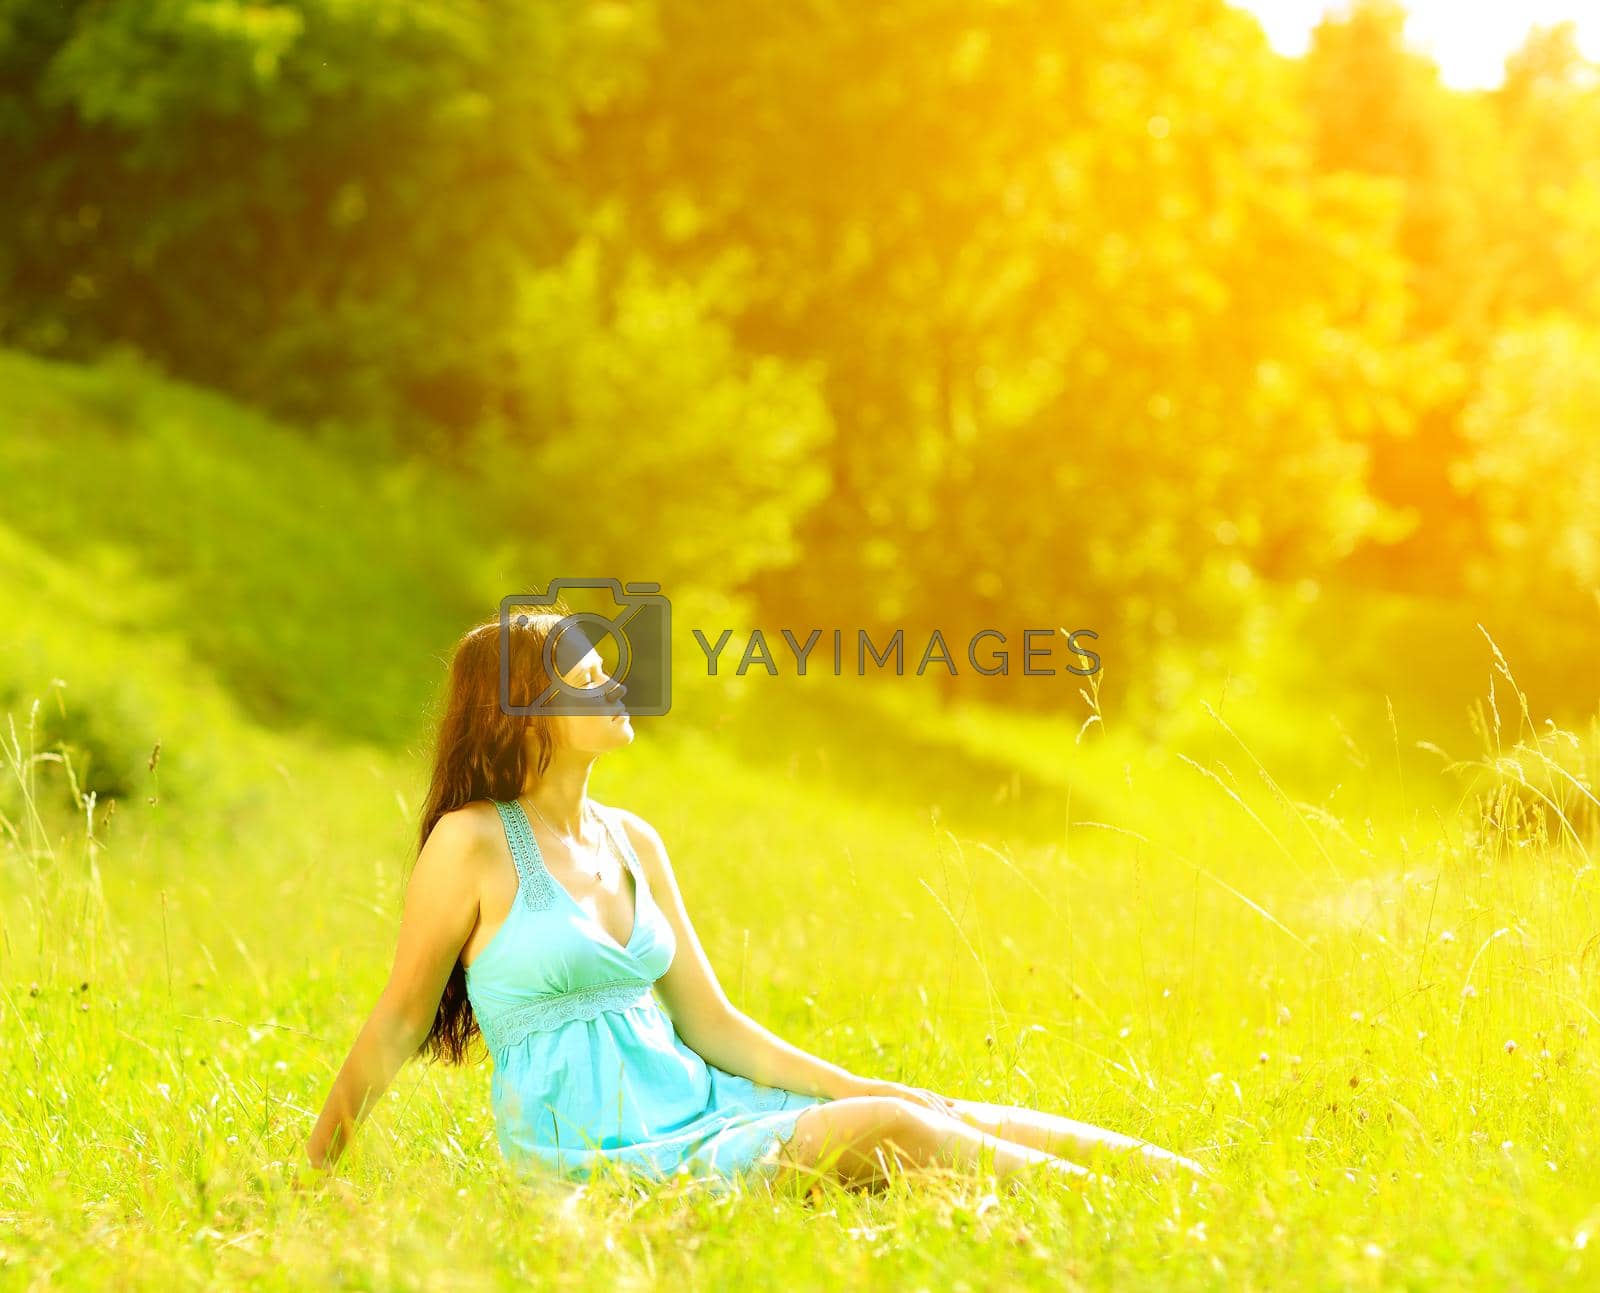 Royalty free image of Beauty Girl Outdoors enjoying nature by SmartPhotoLab